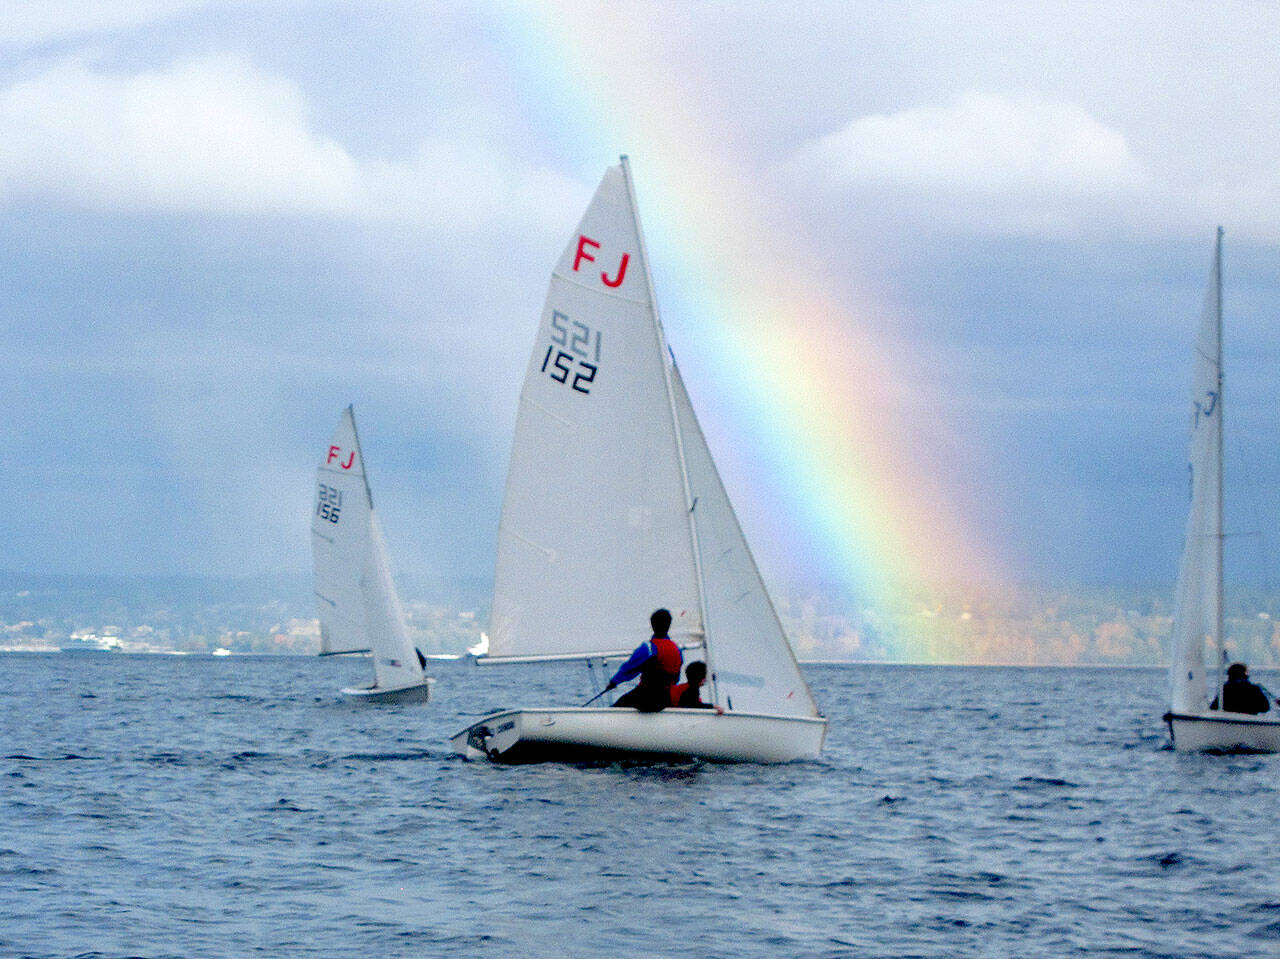 Port Angeles High School sailing team members Elliot Dahlin and Fern Knobel (152), sail at a regional scrimmage this weekend off Kingston as a rainbow comes out. Teammates Ozzy Minard and Ella Schulz are in boat 156. (Courtesy of Perry Brestel)